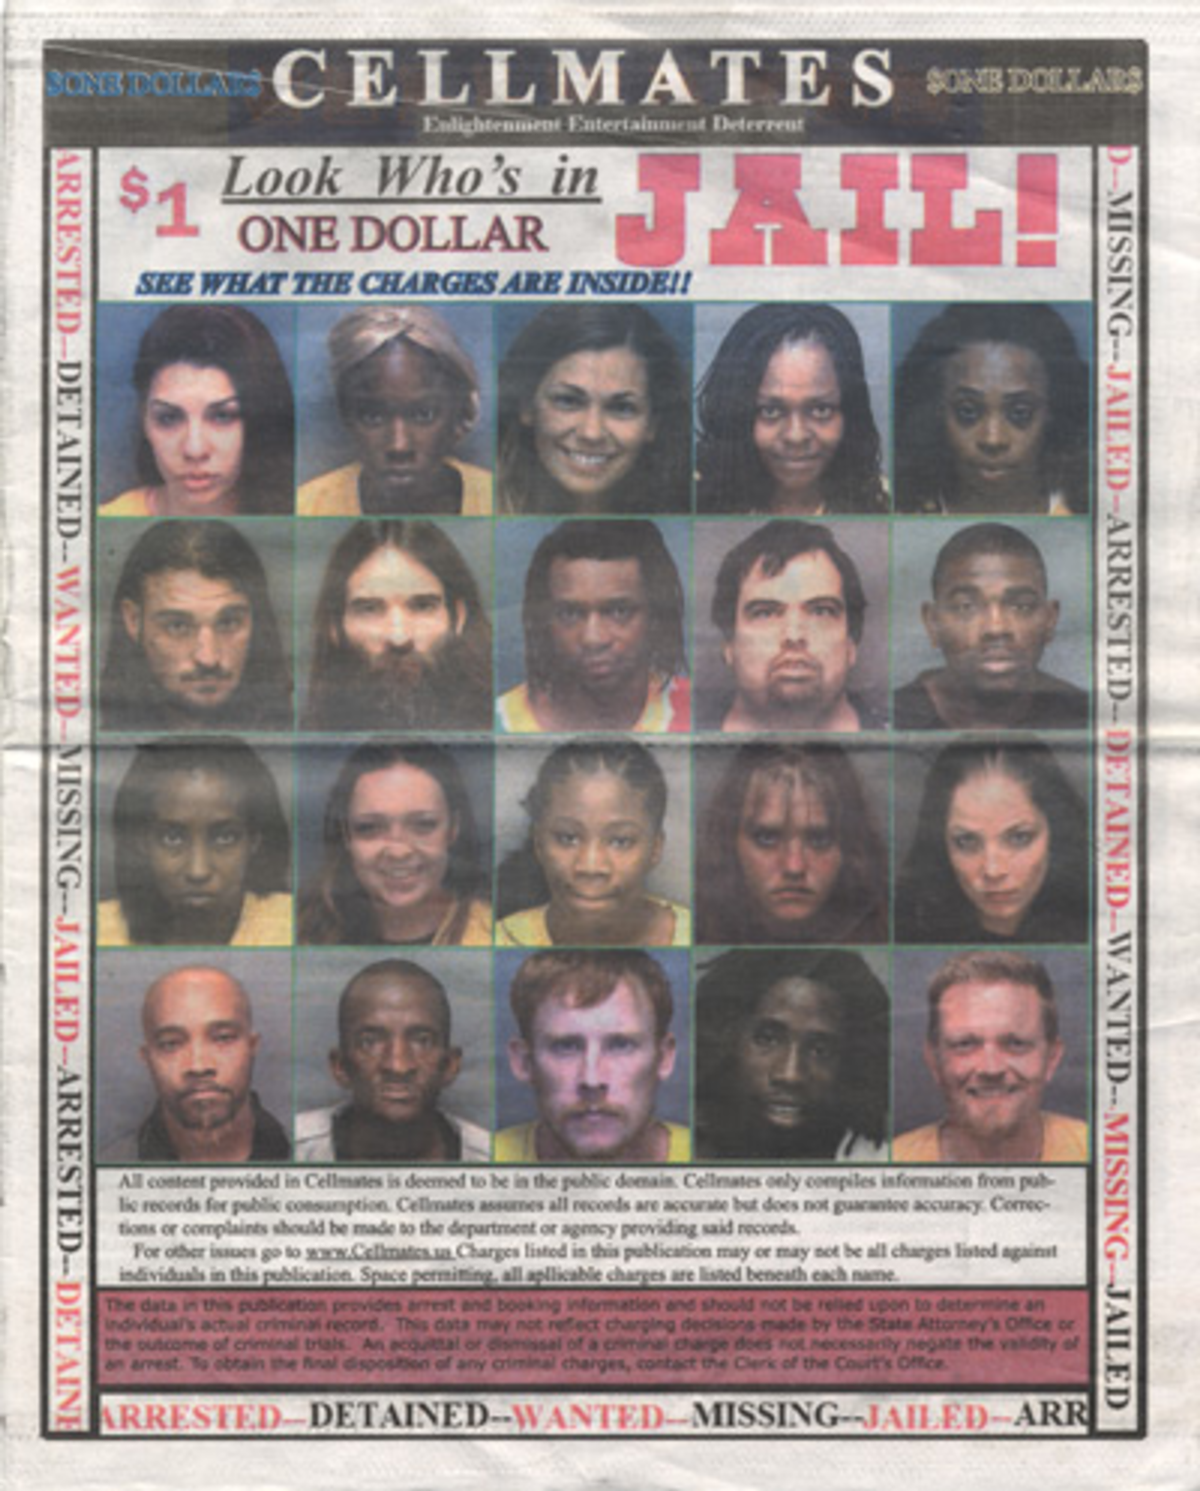 BEST PLACE TO FIND YOUR NEIGHBORS MUG SHOT: Cellmates newspaper